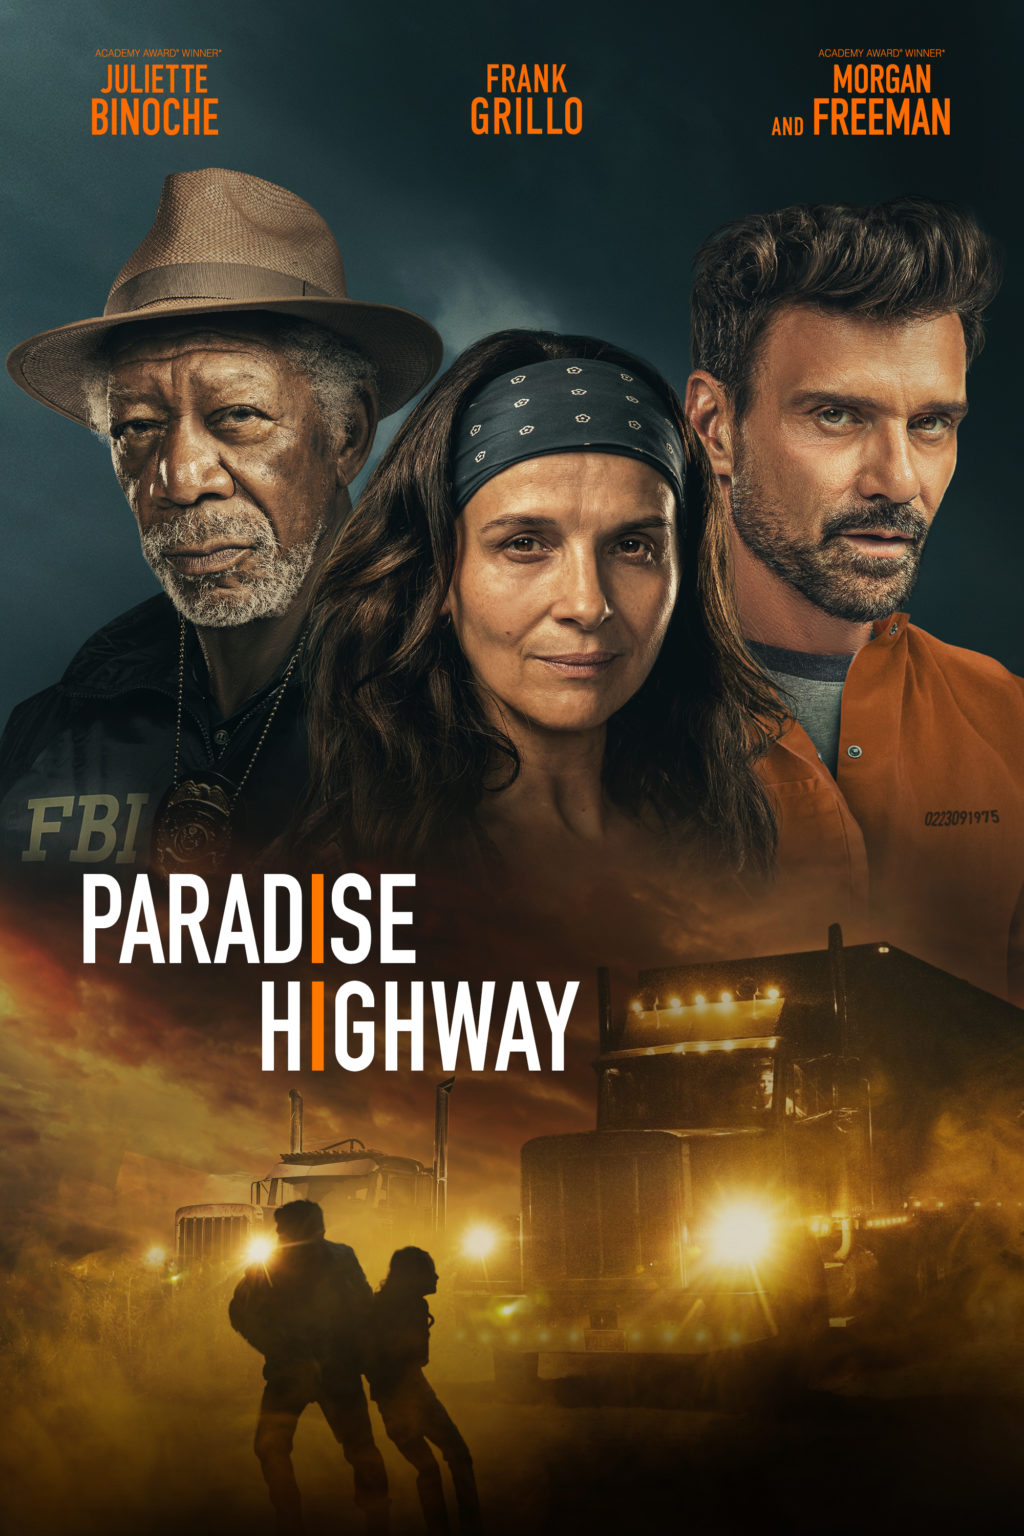 Paradise Highway Movie (2022) Cast & Crew, Release Date, Story, Review, Poster, Trailer, Budget, Collection